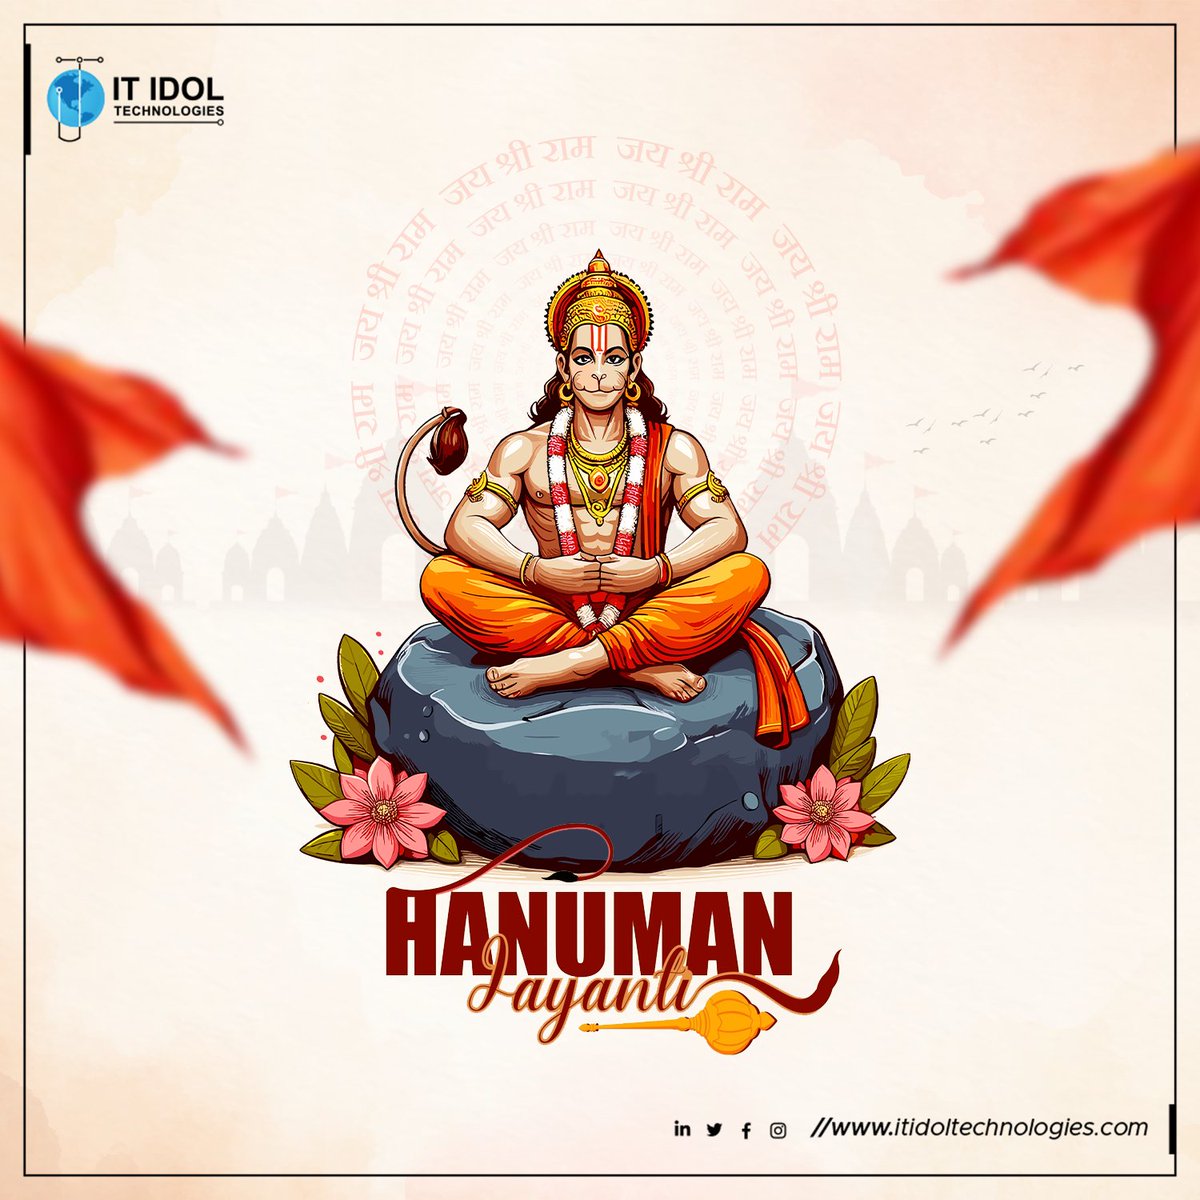 On Hanuman Jayanti, let's bow to the epitome of devotion and strength. May Lord Hanuman's blessings infuse our lives with courage and fortitude. 🙏🏼 

#HanumanJayanti #Strength #Devotion #BajrangBali #DivineBlessings #Courage #BlessingsFromHanuman #Spirituality #BlessedDay